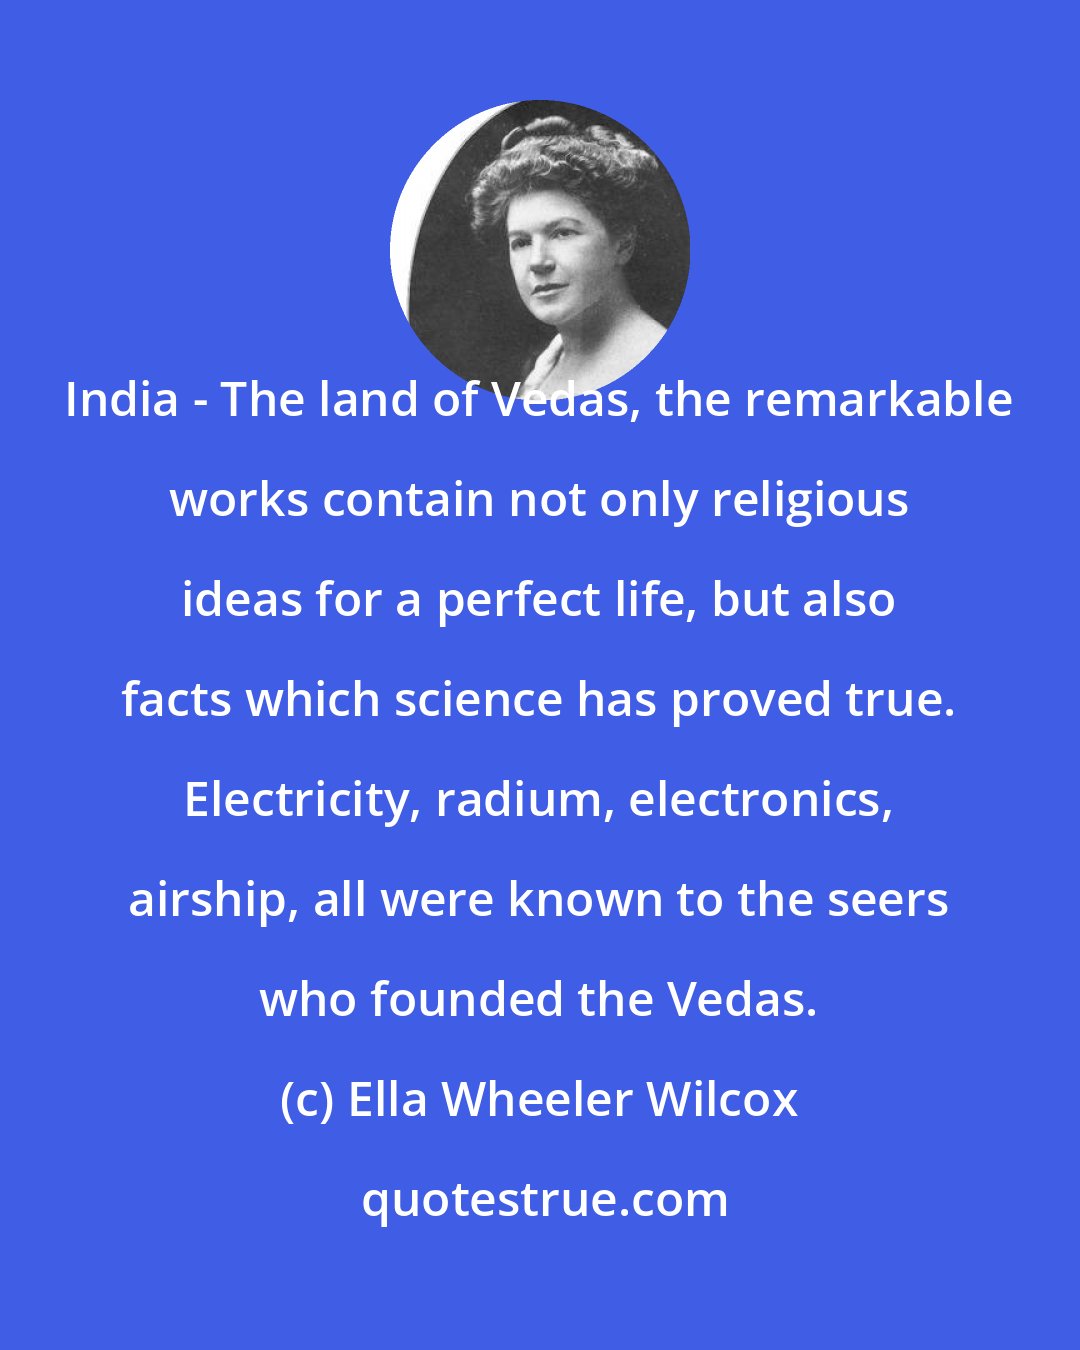 Ella Wheeler Wilcox: India - The land of Vedas, the remarkable works contain not only religious ideas for a perfect life, but also facts which science has proved true. Electricity, radium, electronics, airship, all were known to the seers who founded the Vedas.